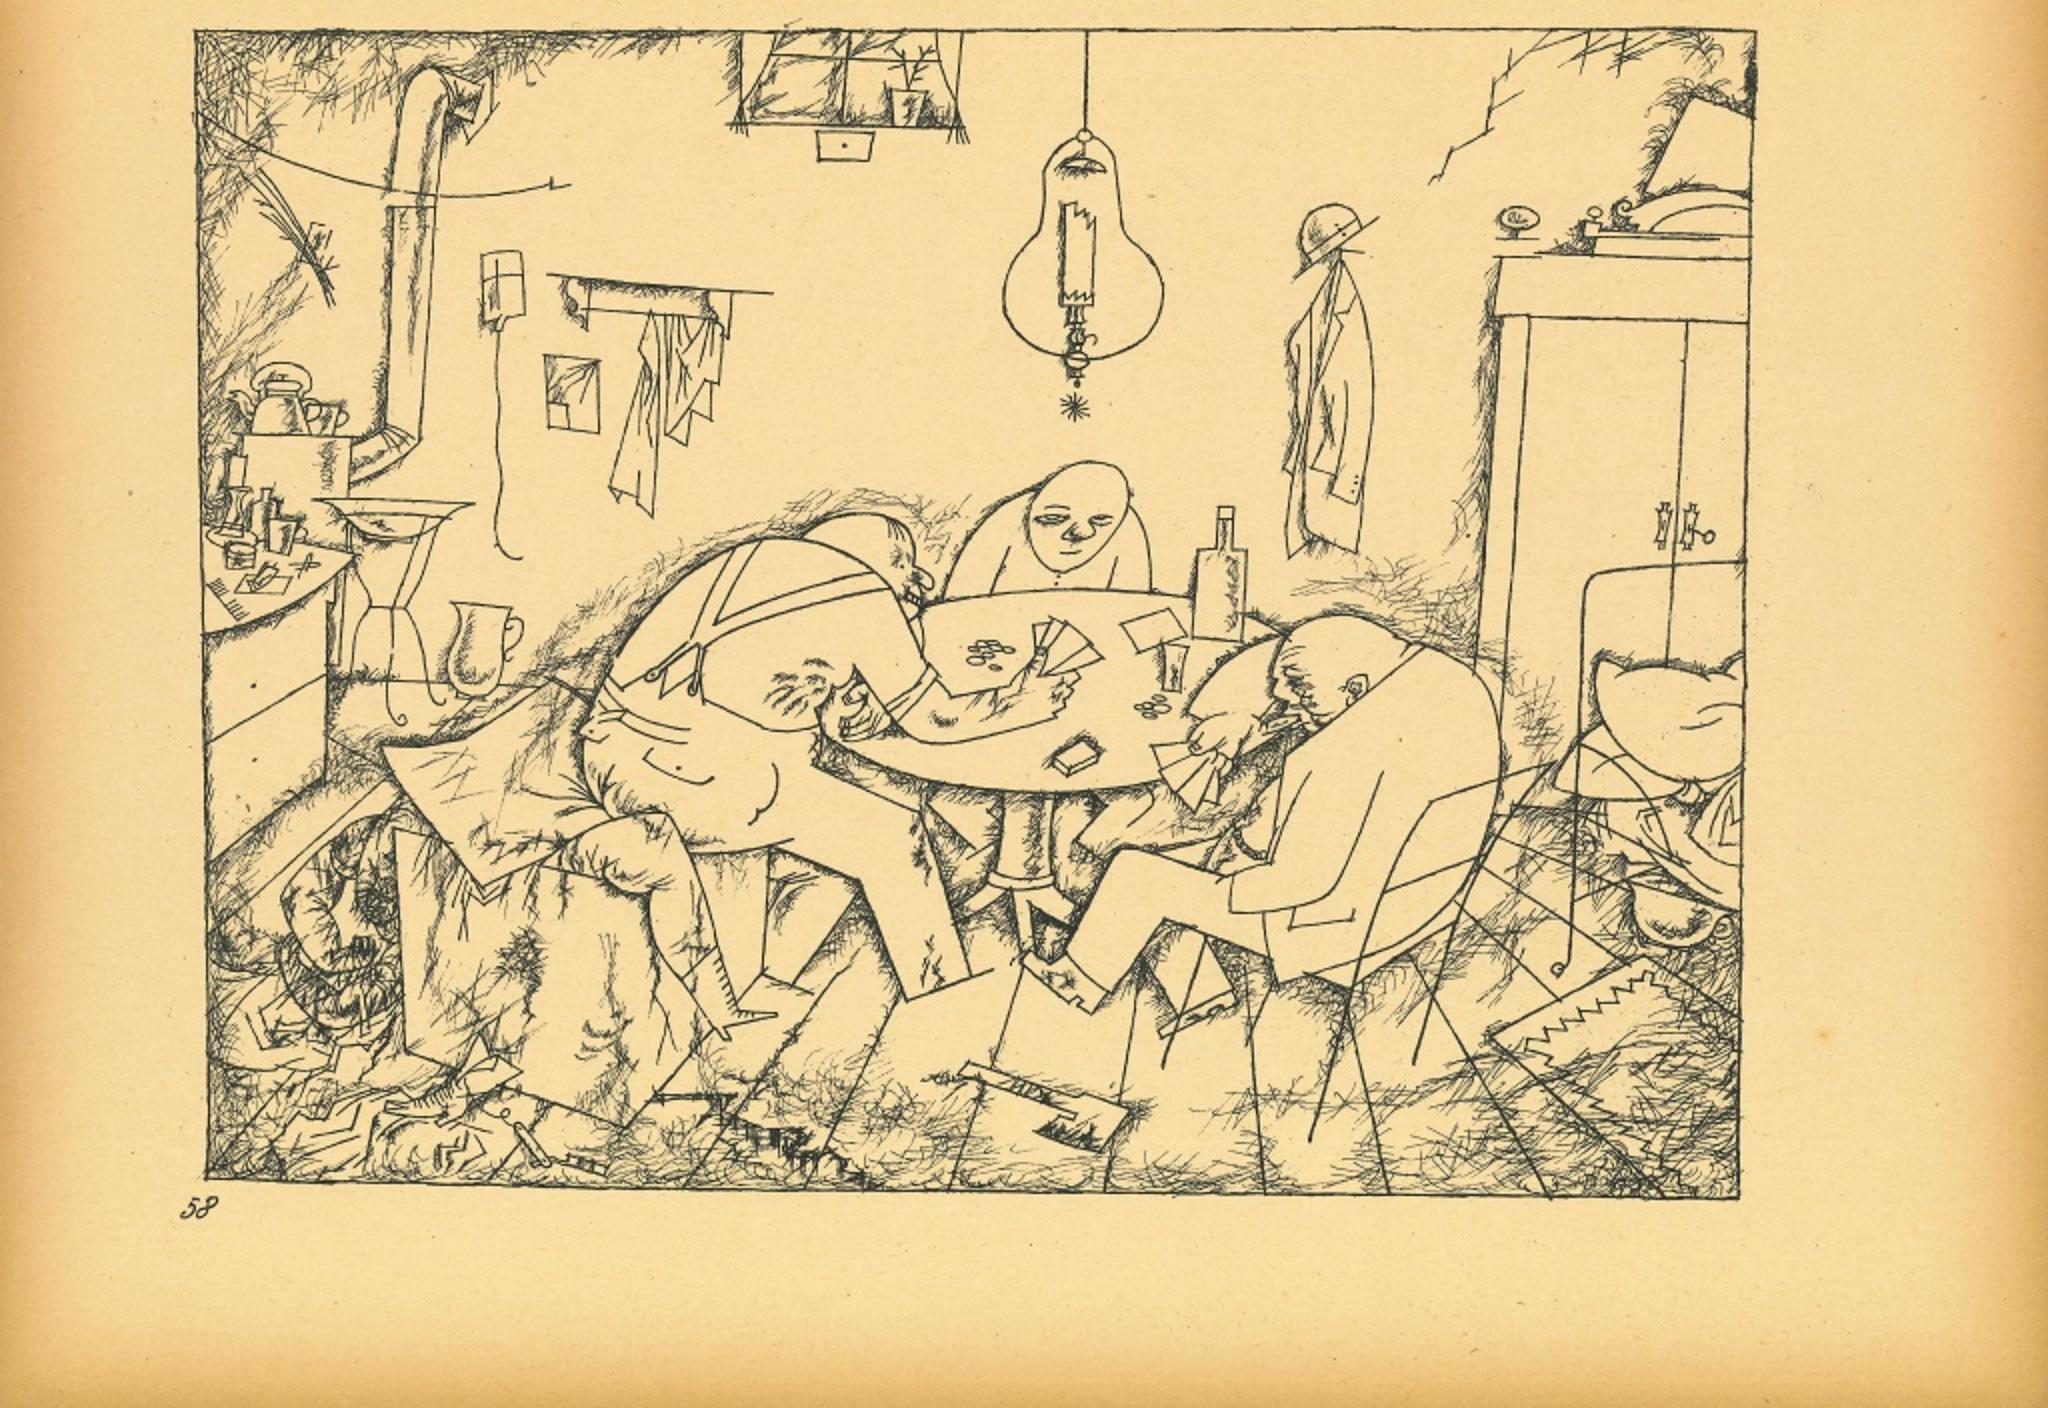 Apachen from Ecce Homo is an original offset and lithograph, realized by George Grosz.

The artwork is the plate n. 58 from the portfolio Ecce Homo published between 1922/1923, edition of Der Malik-Verlag Berlin.

Numbered on plate on lower margin.